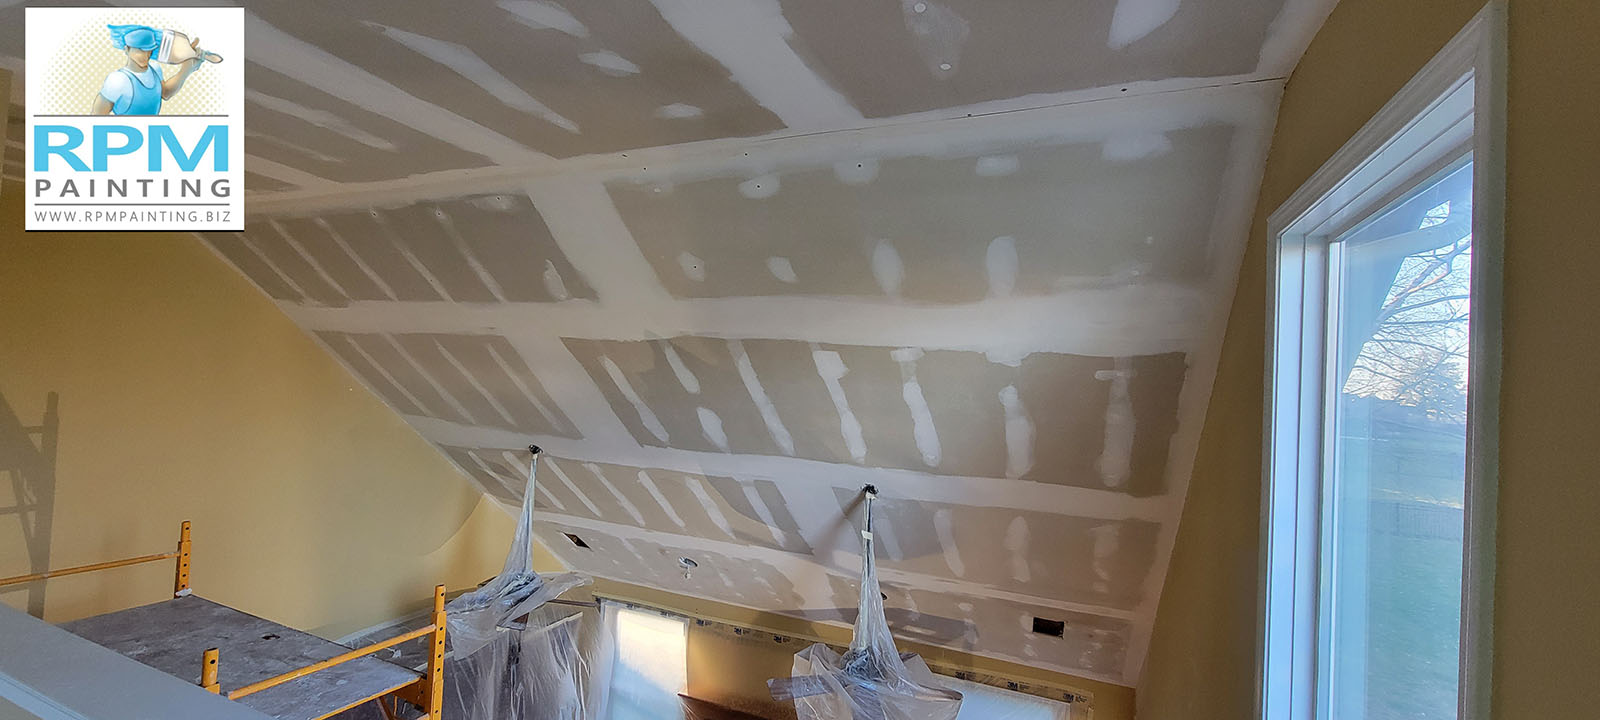 Popcorn Ceiling Removal / Conversion in Raintree Lake, Lee’s Summit MO